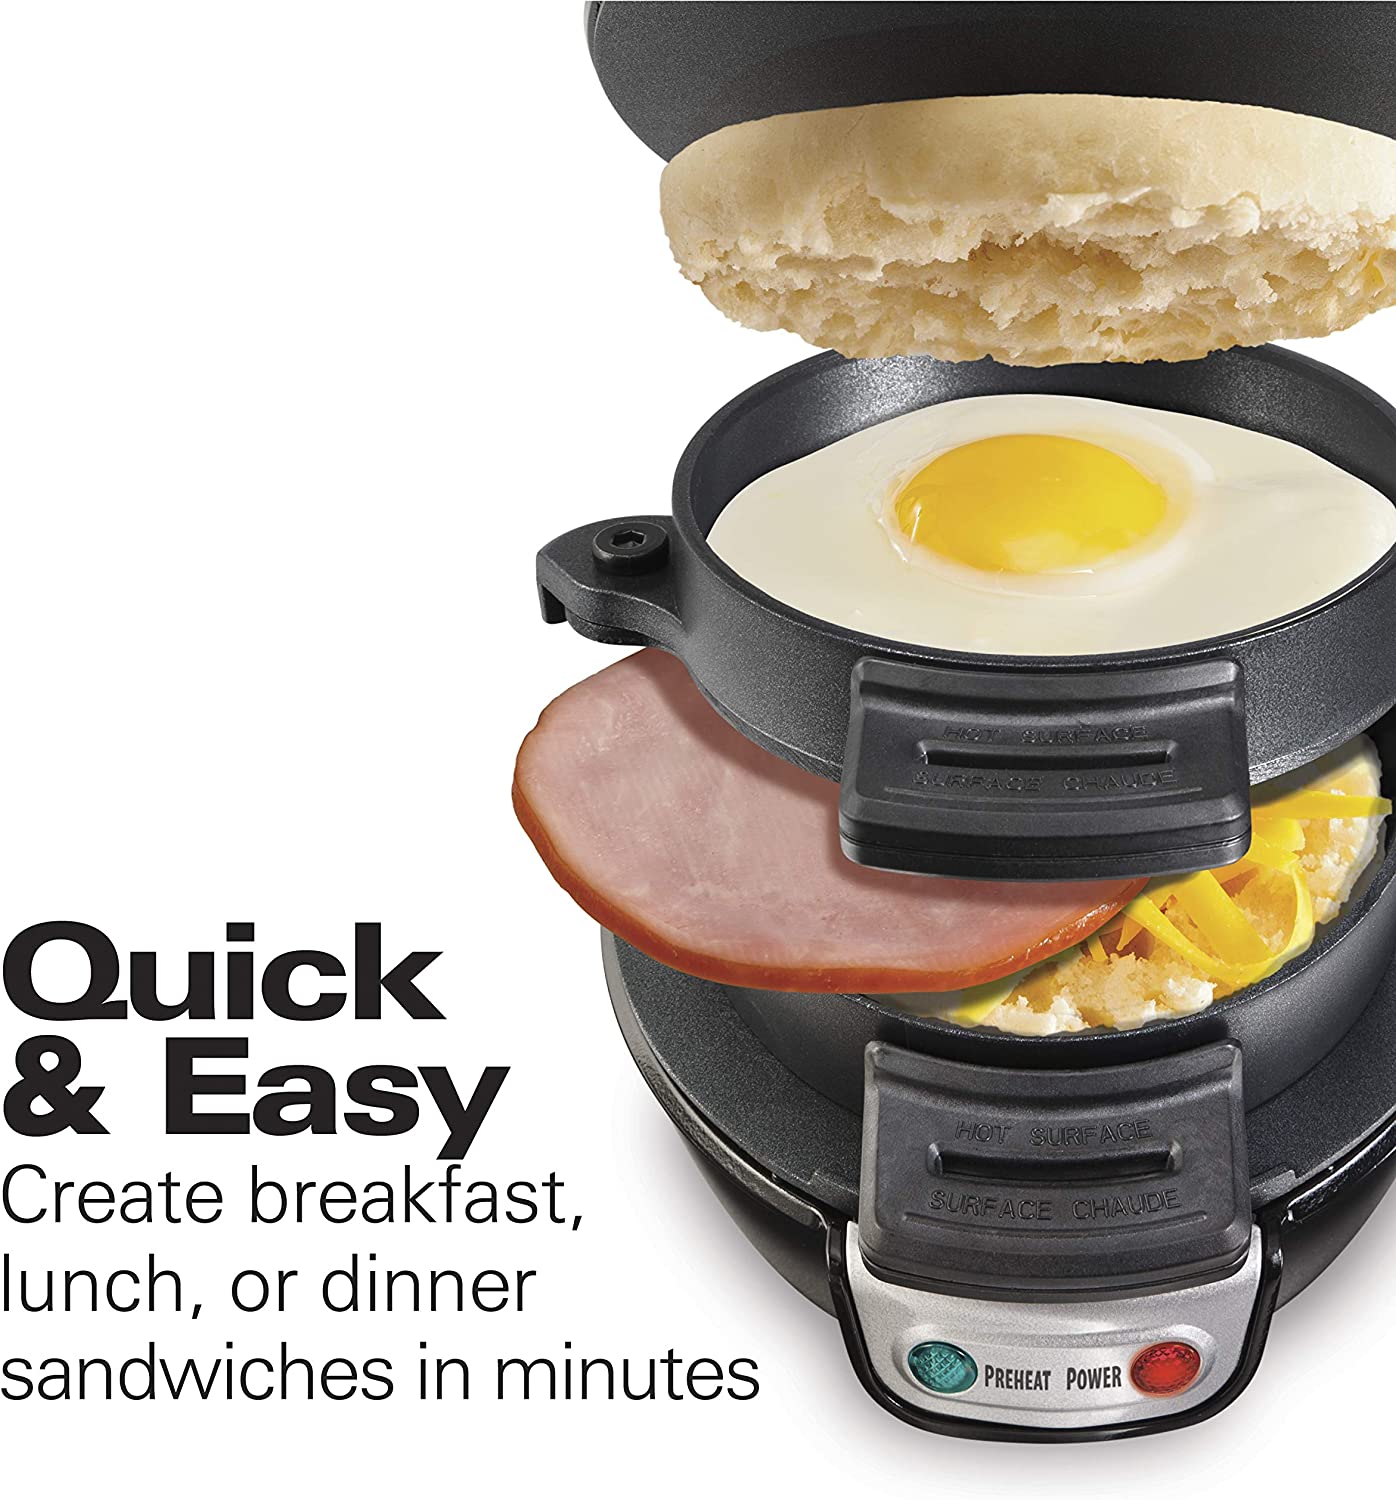 Breakfast Sandwich Maker with Egg Cooker Ring, Customize Ingredients, Perfect for English Muffins, Croissants, Mini Waffles, Single, Silver